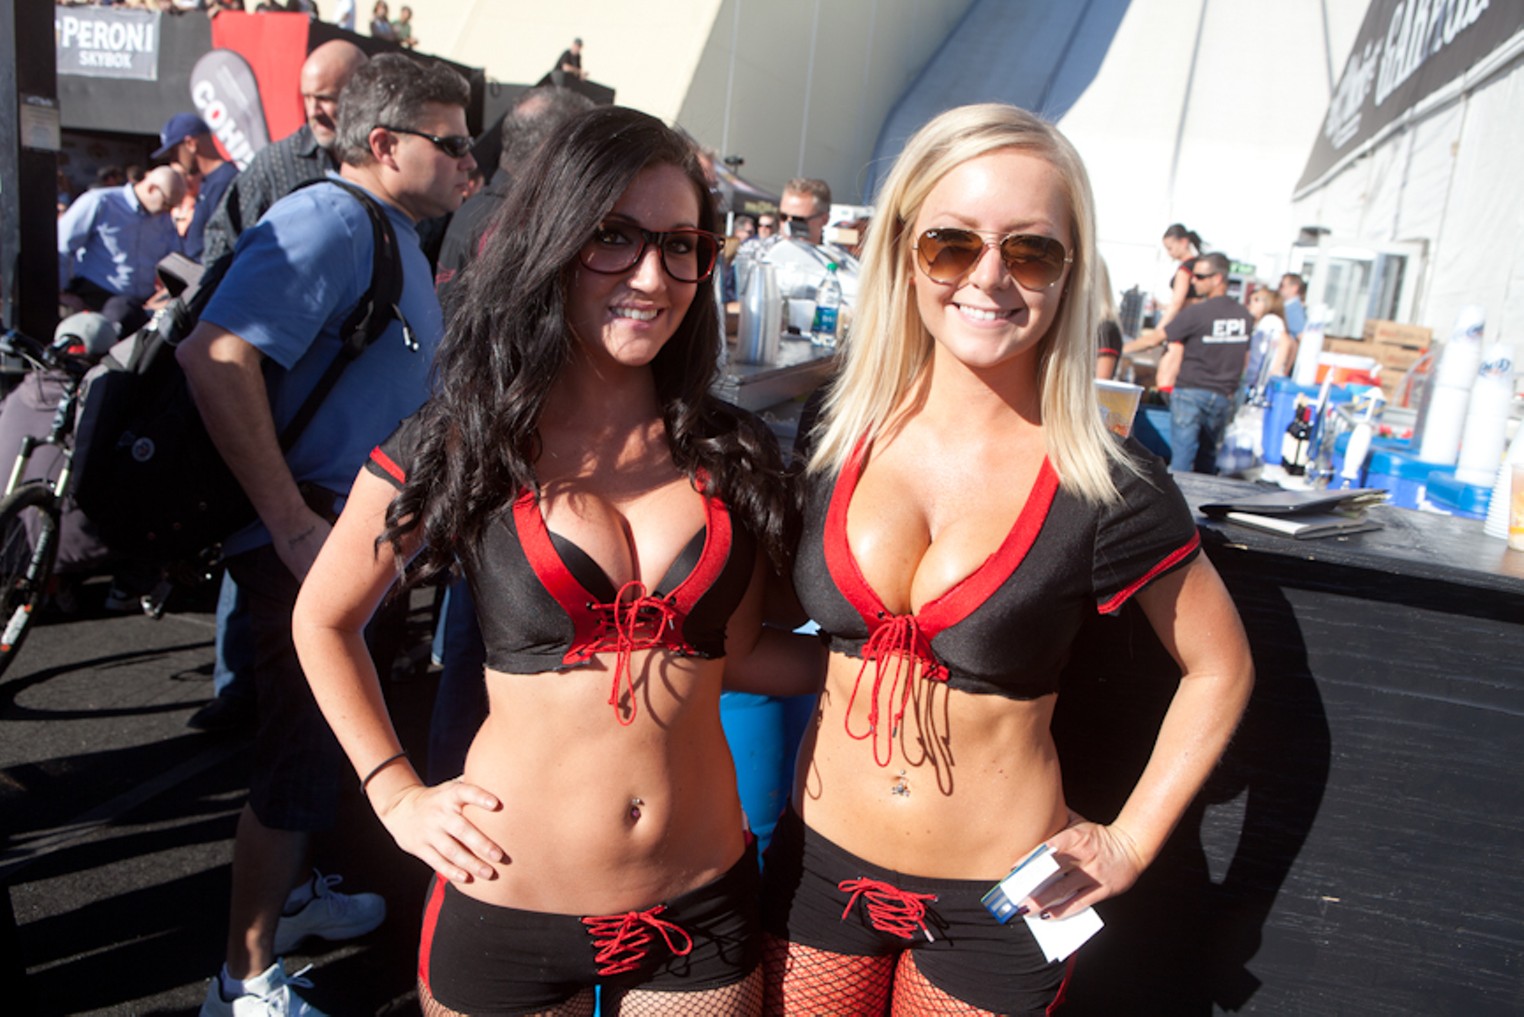 The Girls of BarrettJackson Collector Car Auction in Scottsdale